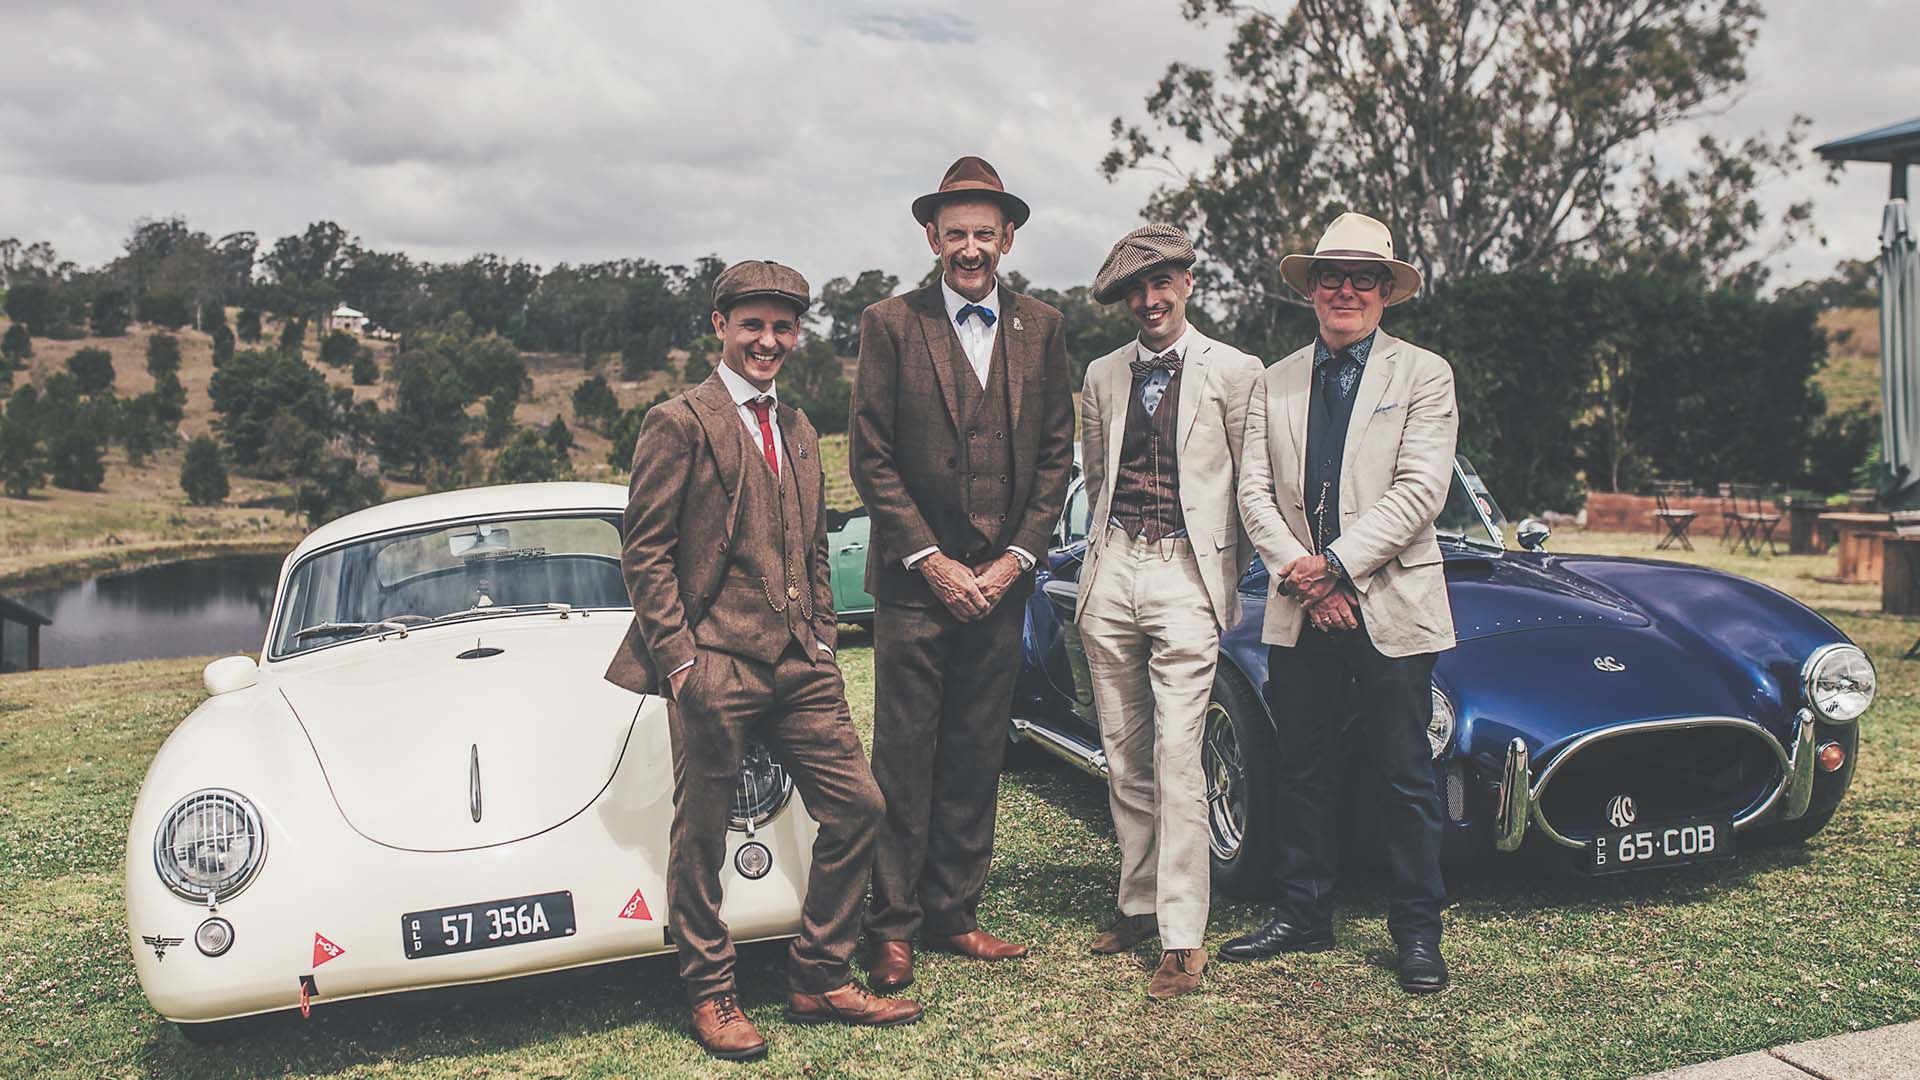 Four superbly-dressed dapper men posing in front of two classic cars.